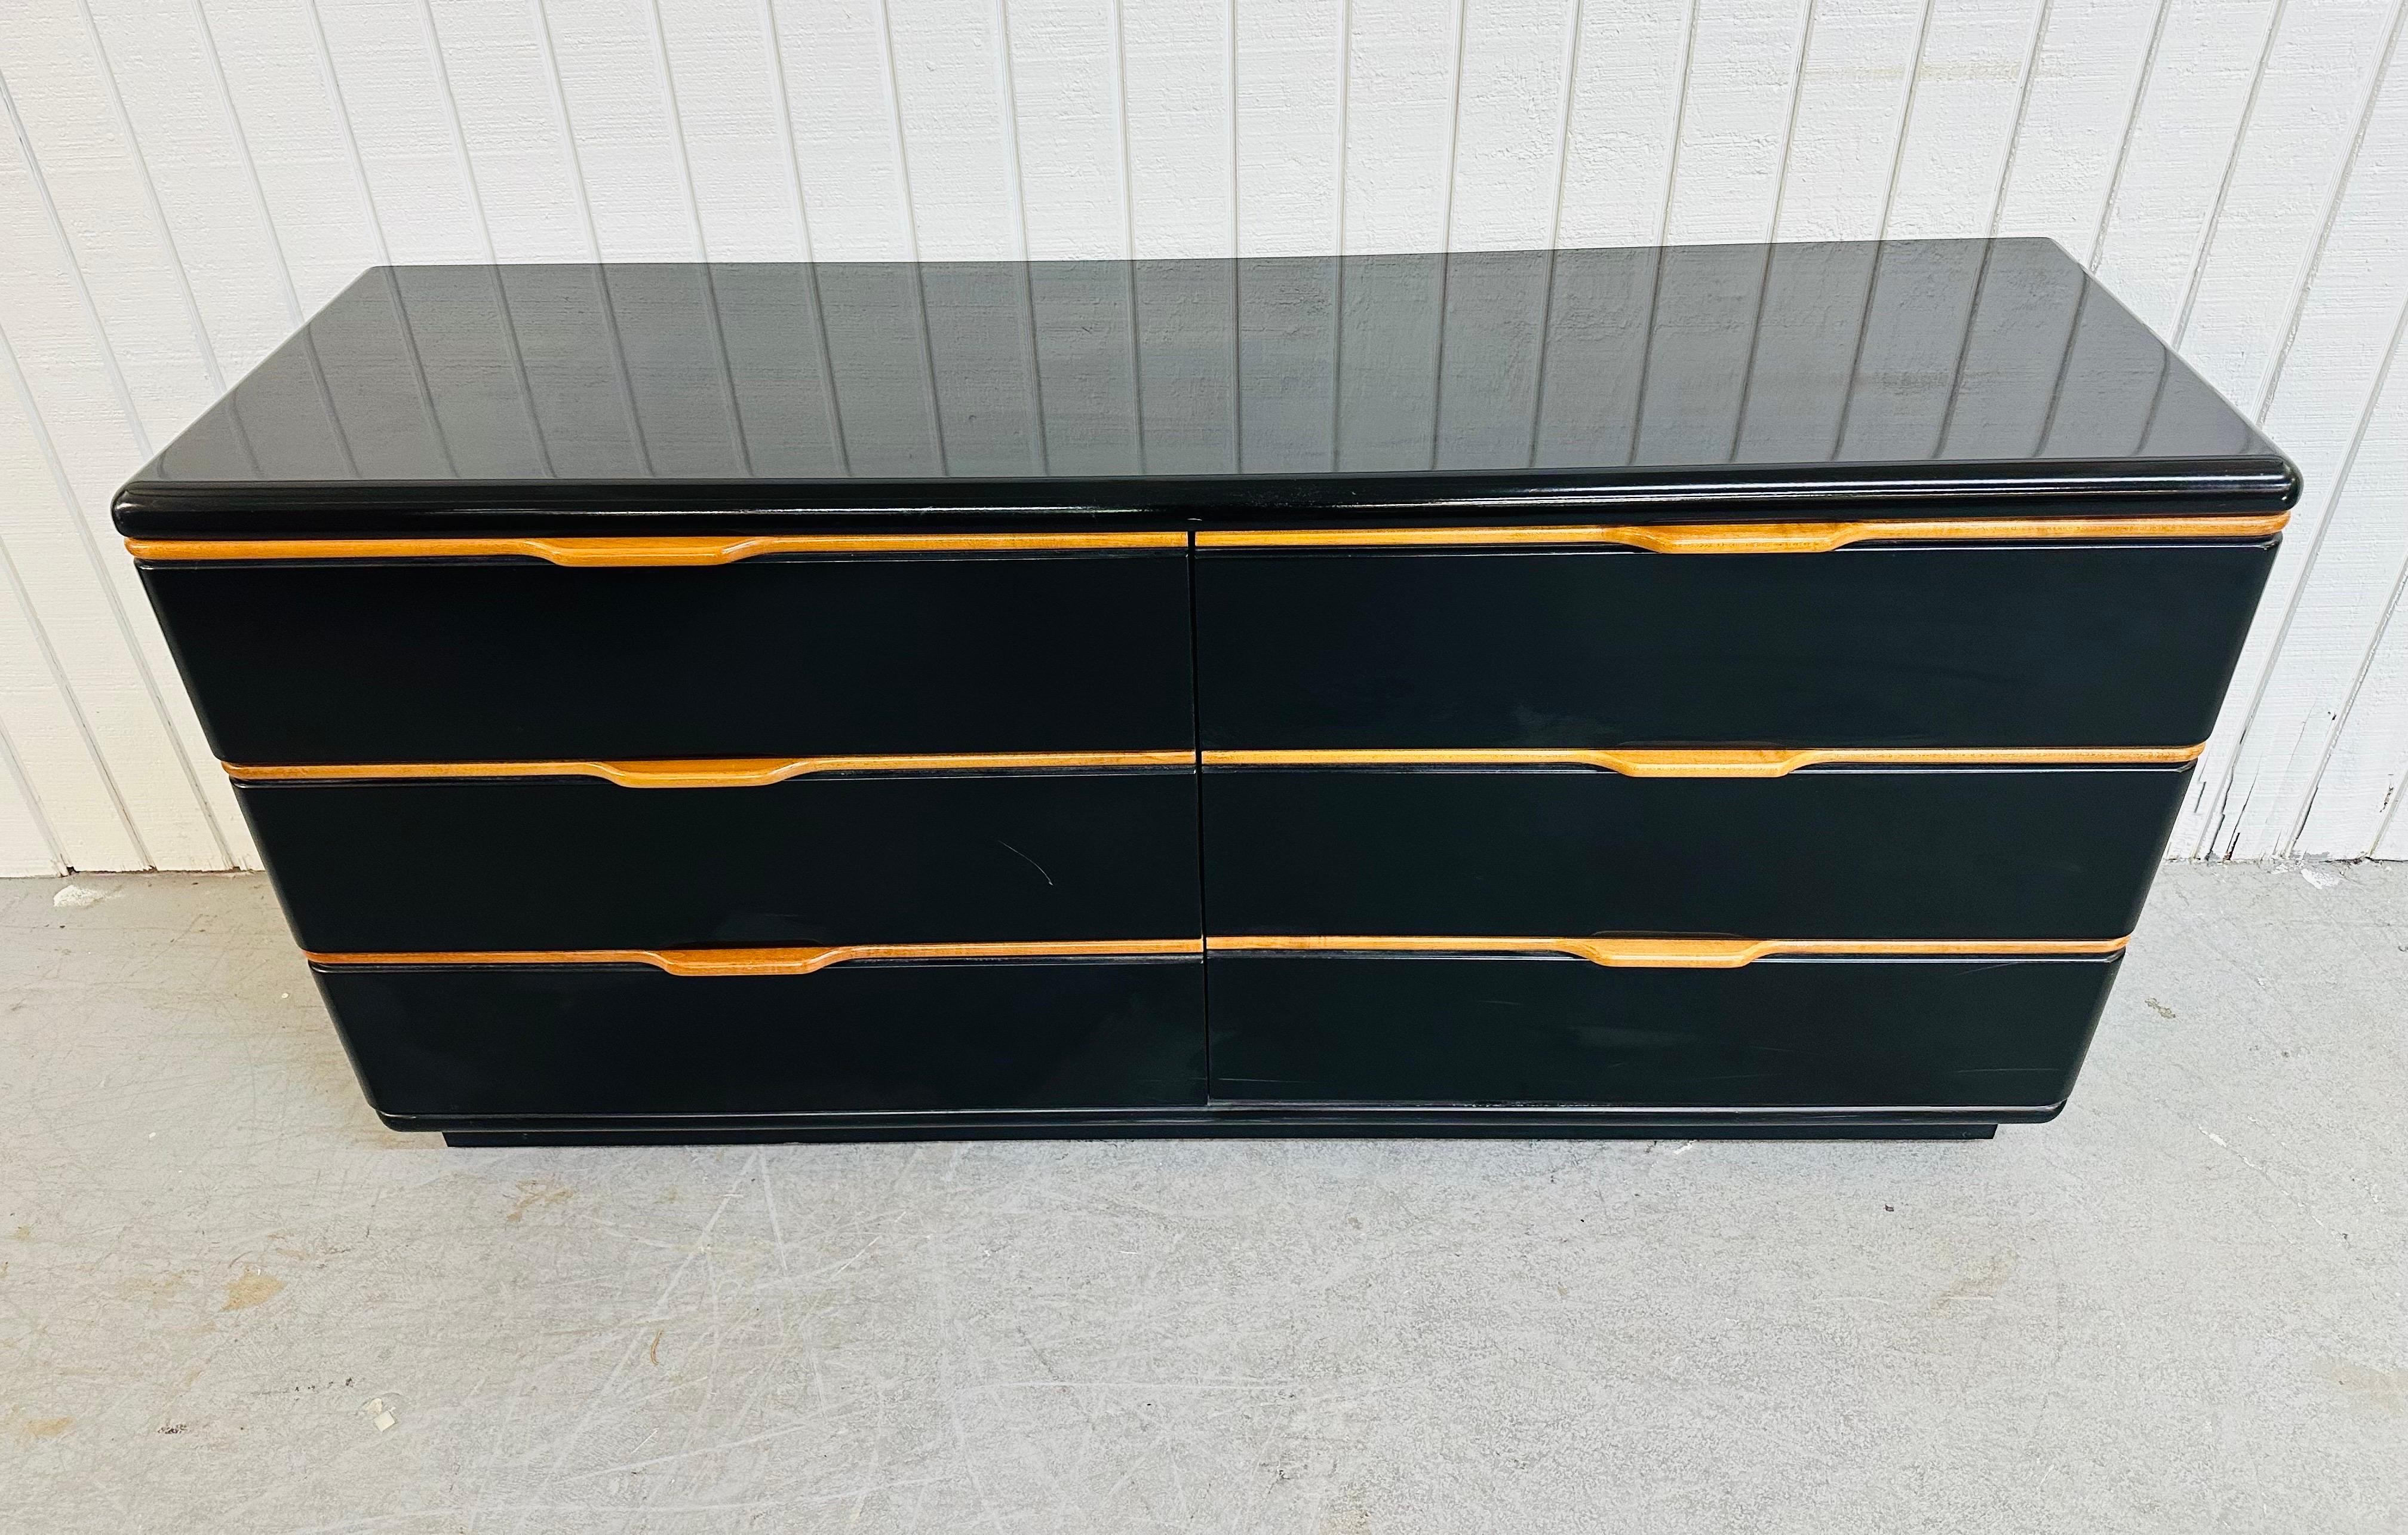 This listing is for a Post Modern Lane Black Lacquered Dresser. Featuring a straight line design, six large drawers for storage, wooden pulls, and a beautiful black lacquered finish. This is an exceptional combination of quality and design by Lane!